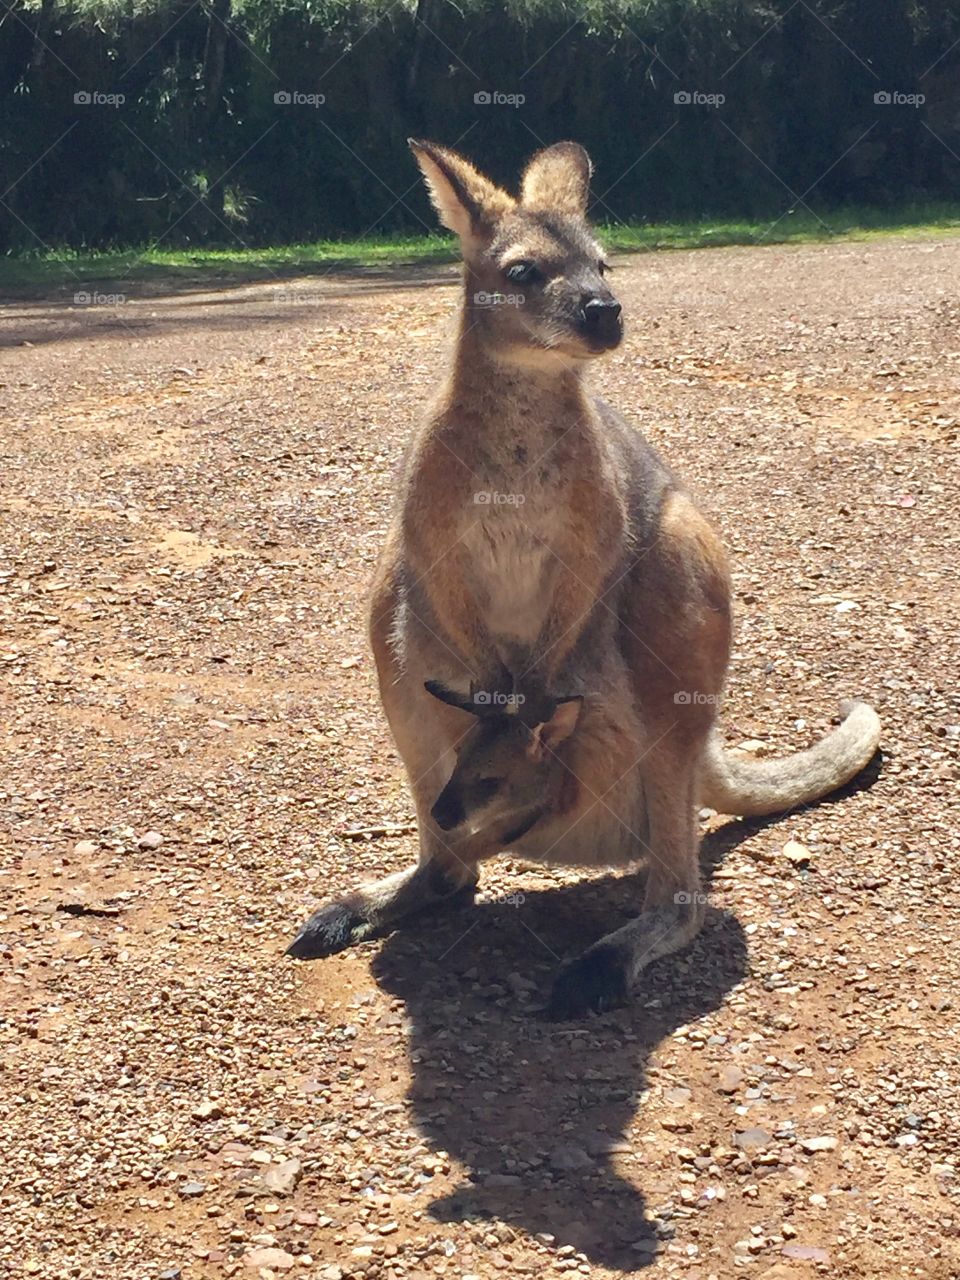 A very close encounter with a wild mother kangaroo and her child. (Without fence!)